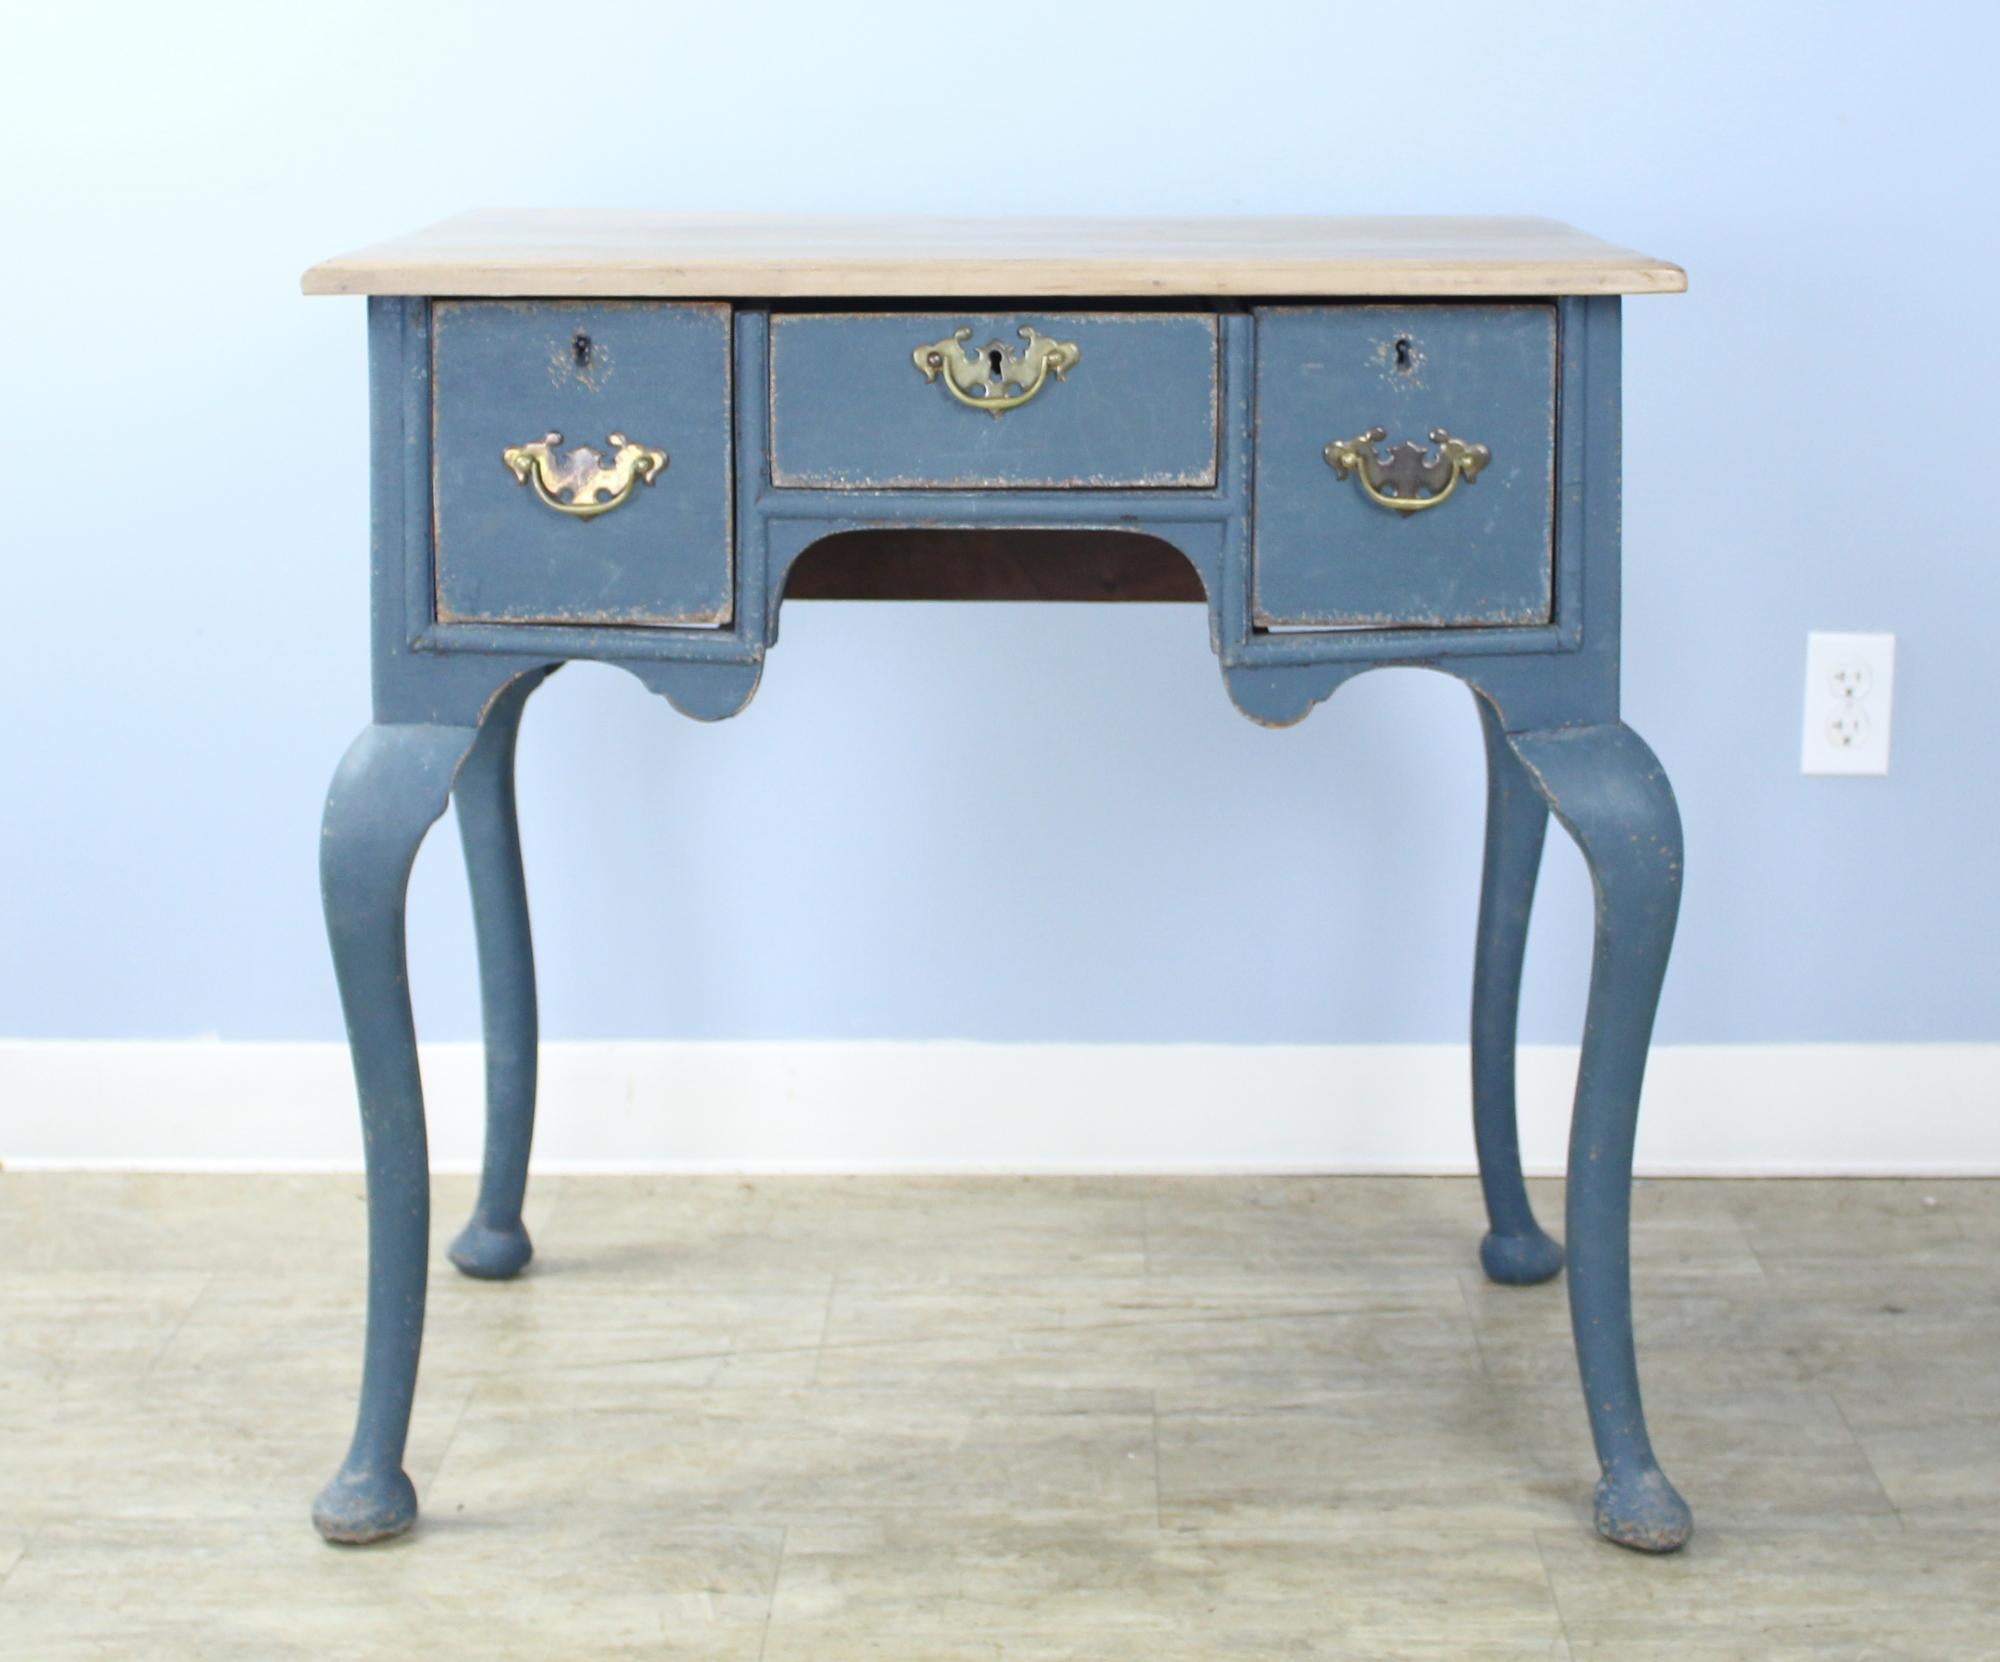 An early country padfoot lowboy, with all of the graceful elements of its type, newly painted in a cool blue and faux distressed for a vibrant modern look. The top has been bleached to complete the picture. An antique Silhouette made eye-catching